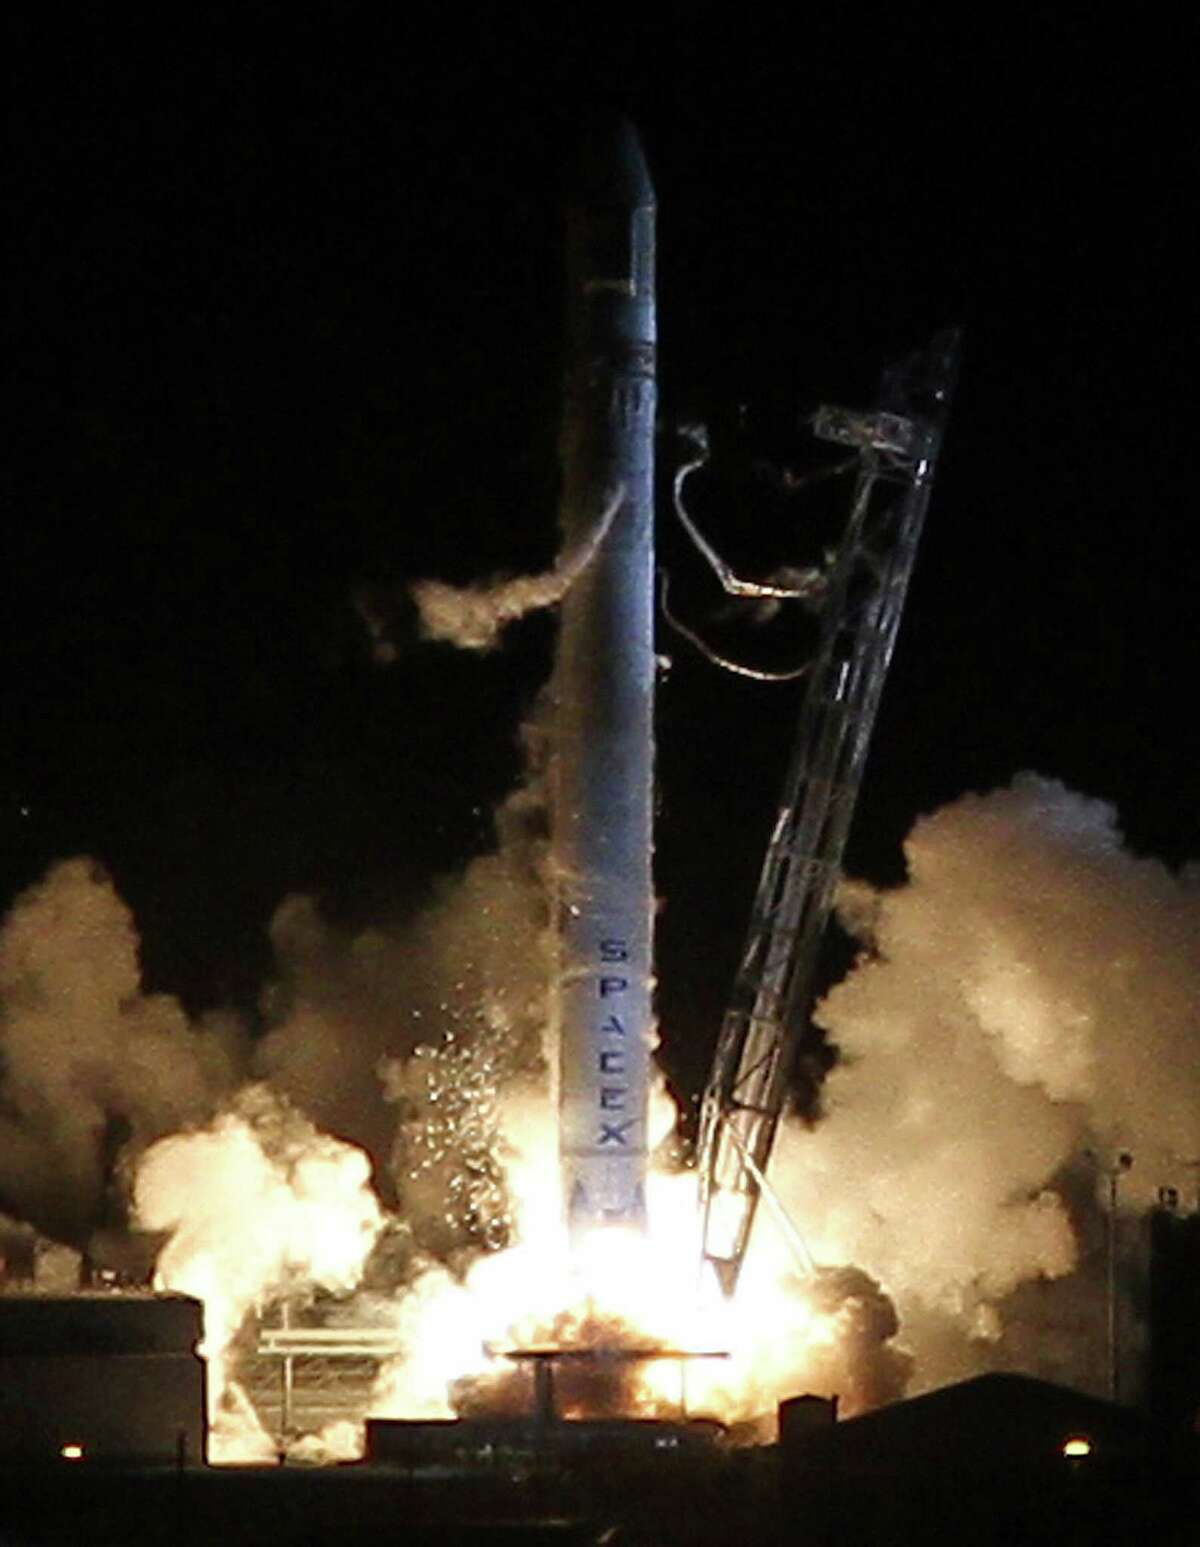 A Falcon 9 rocket carrying the Dragon spacecraft blasts off, Tuesday, May 22, 2012, from Complex 40 at Cape Canaveral Air Force Station. SpaceX is the first private company to build a rocket for a mission to the International Space Station. (Red Huber/Orlando Sentinel/MCT)